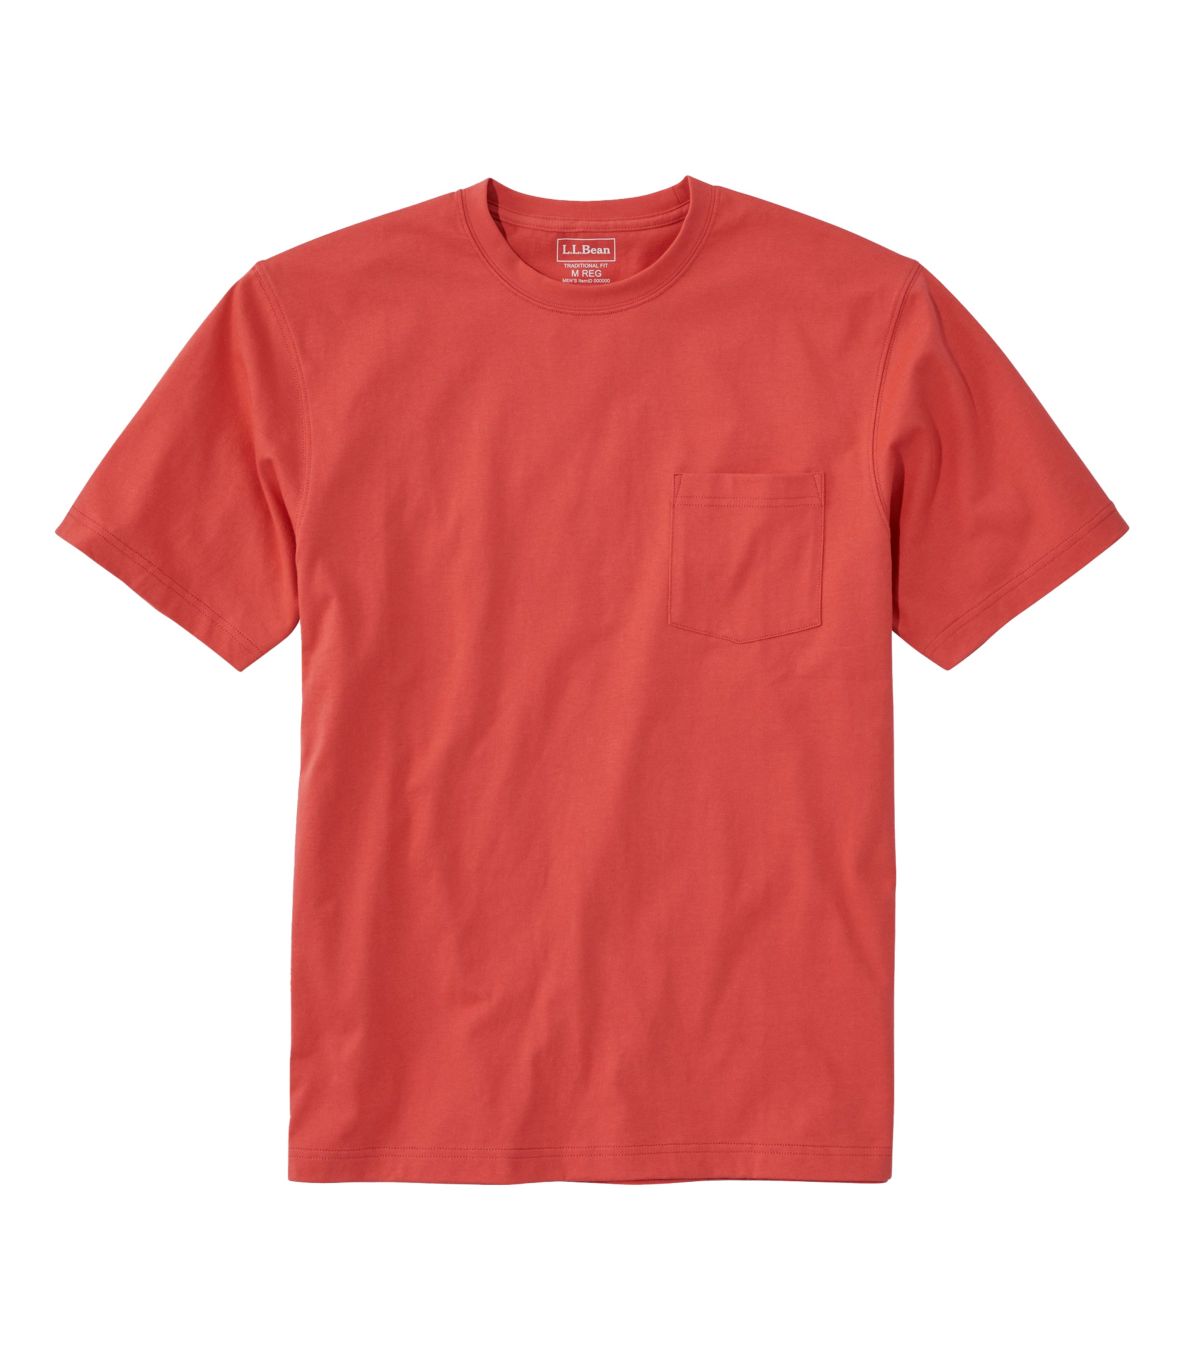 Men's Carefree Unshrinkable Tee with Pocket, Traditional Fit